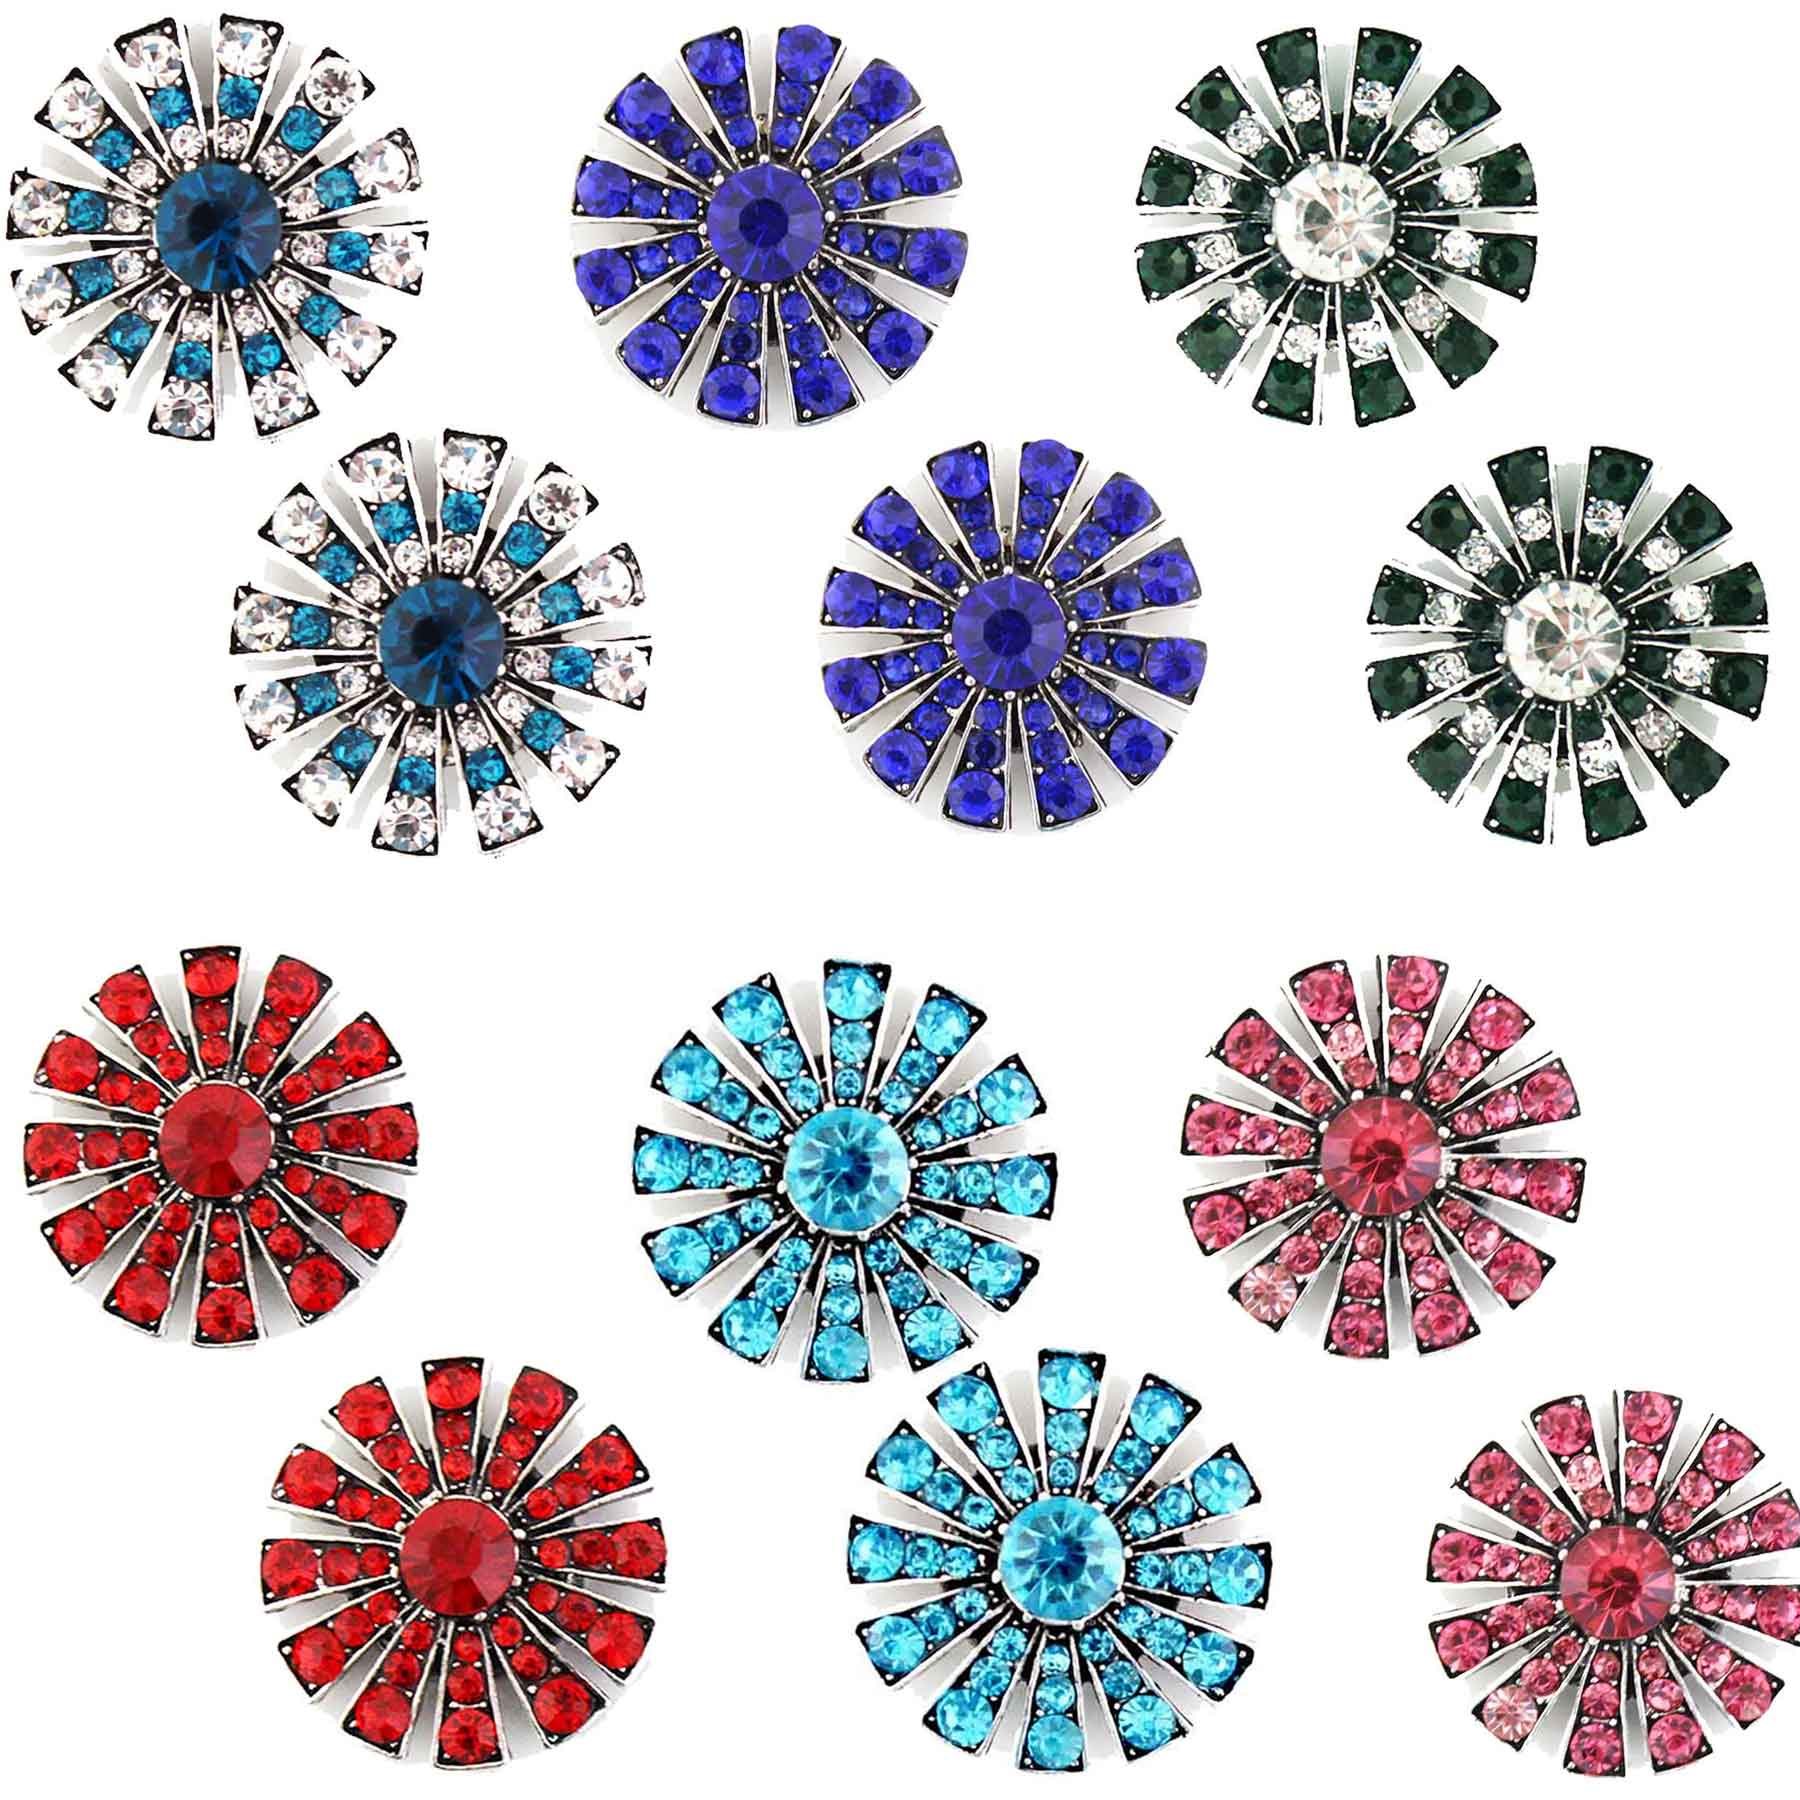 Starburst Magnetic Brooches - Double Sided 2907